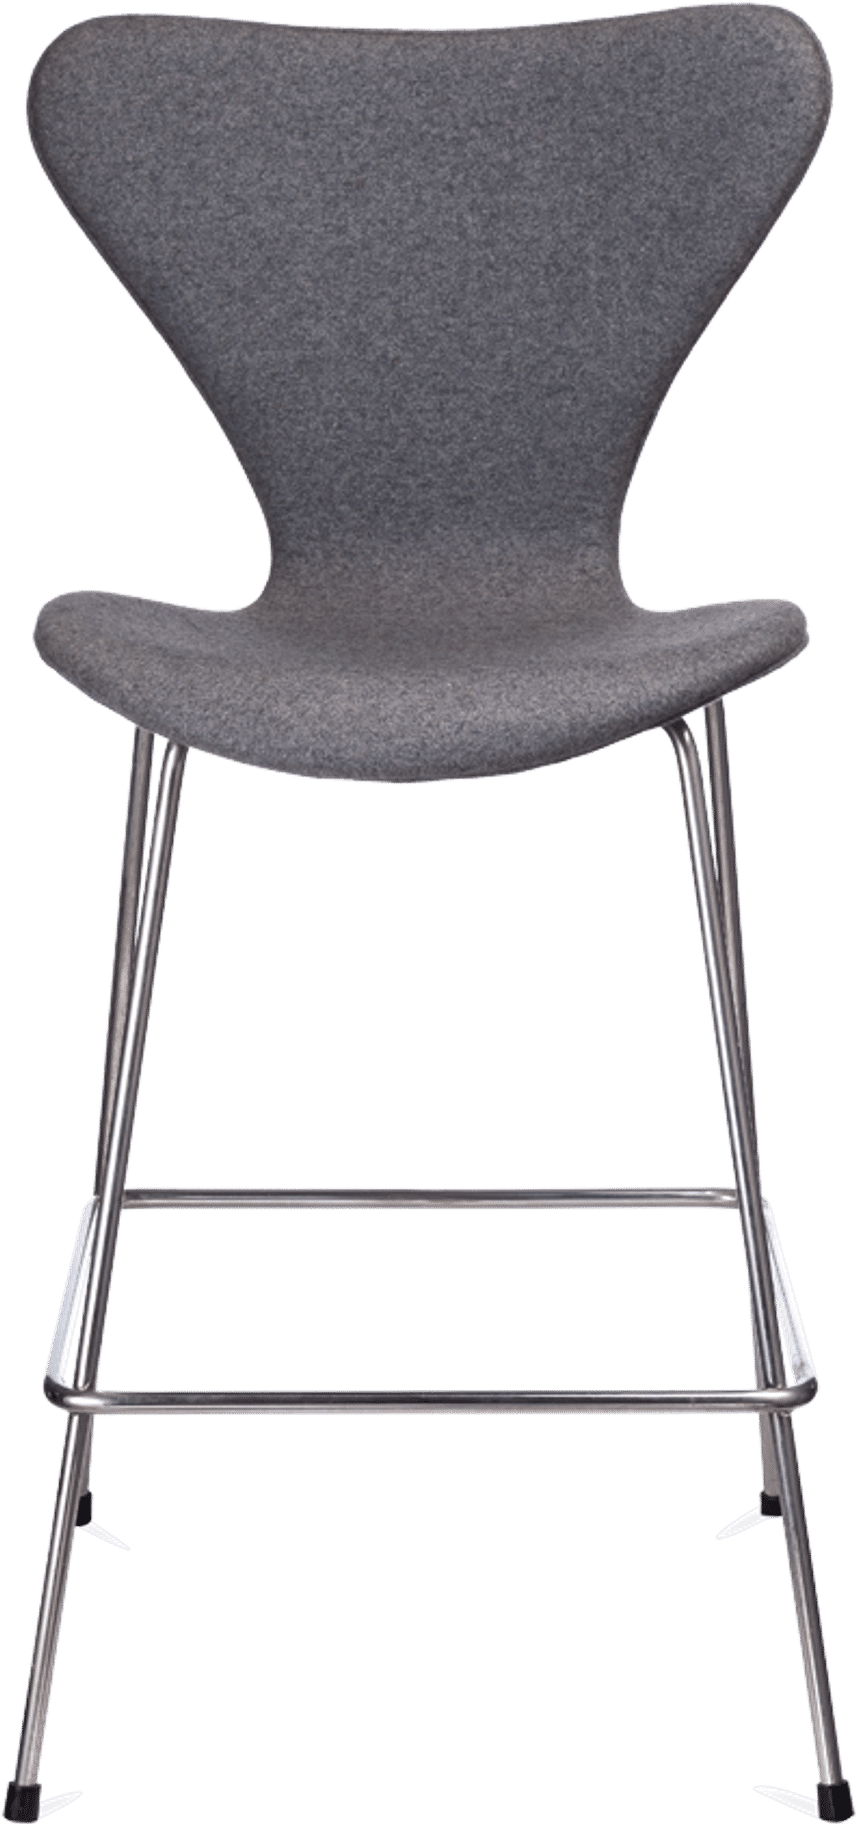 Series 7 Counter Stool Upholstered Charcoal Grey image.